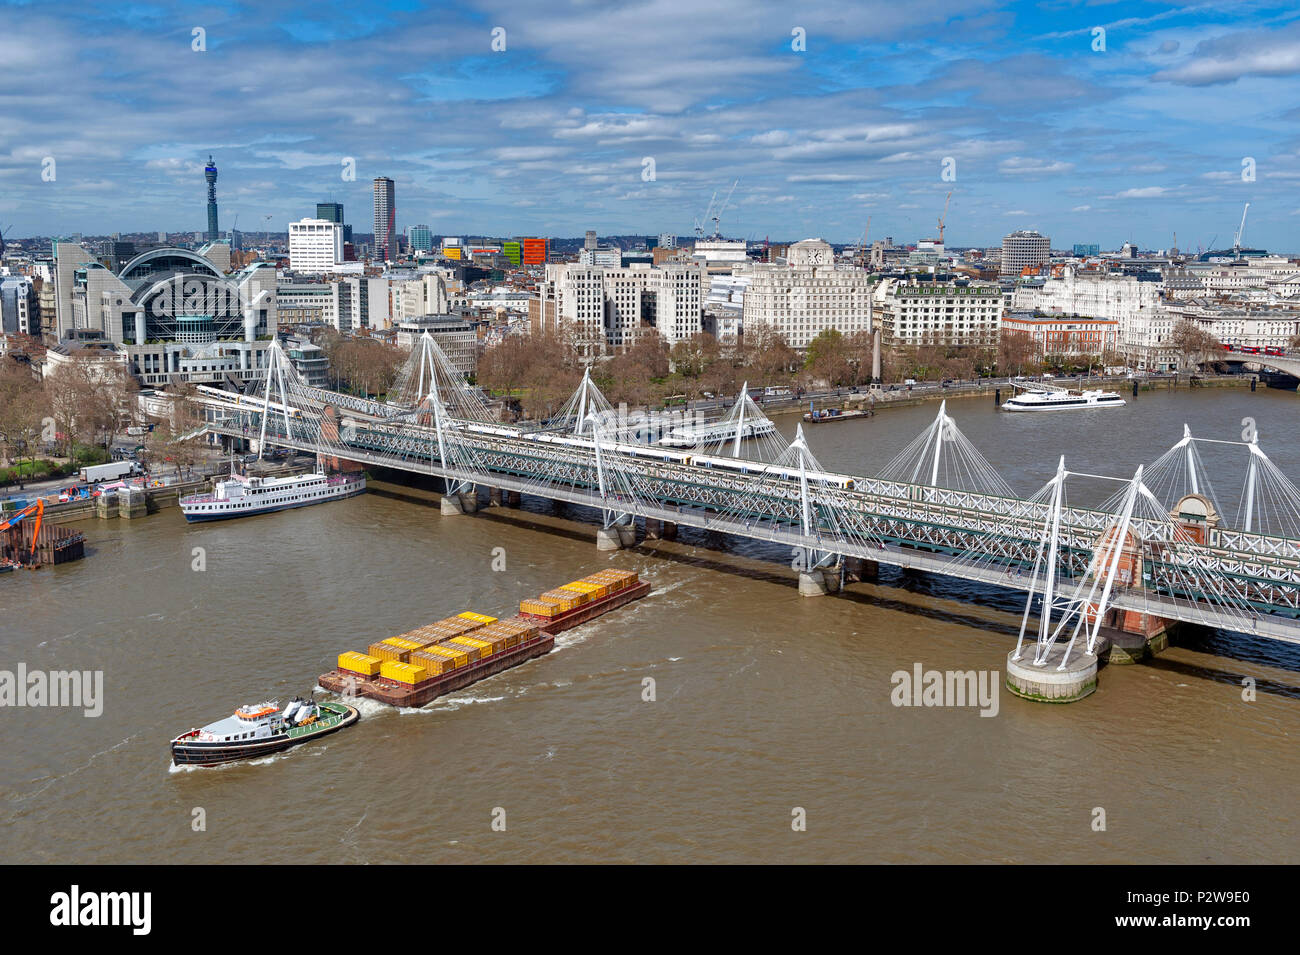 Aerial view of Hungerford Bridge, and Golden Jubilee Bridges, two cable-stayed pedestrian bridges over the River Thames in London, England, UK Stock Photo